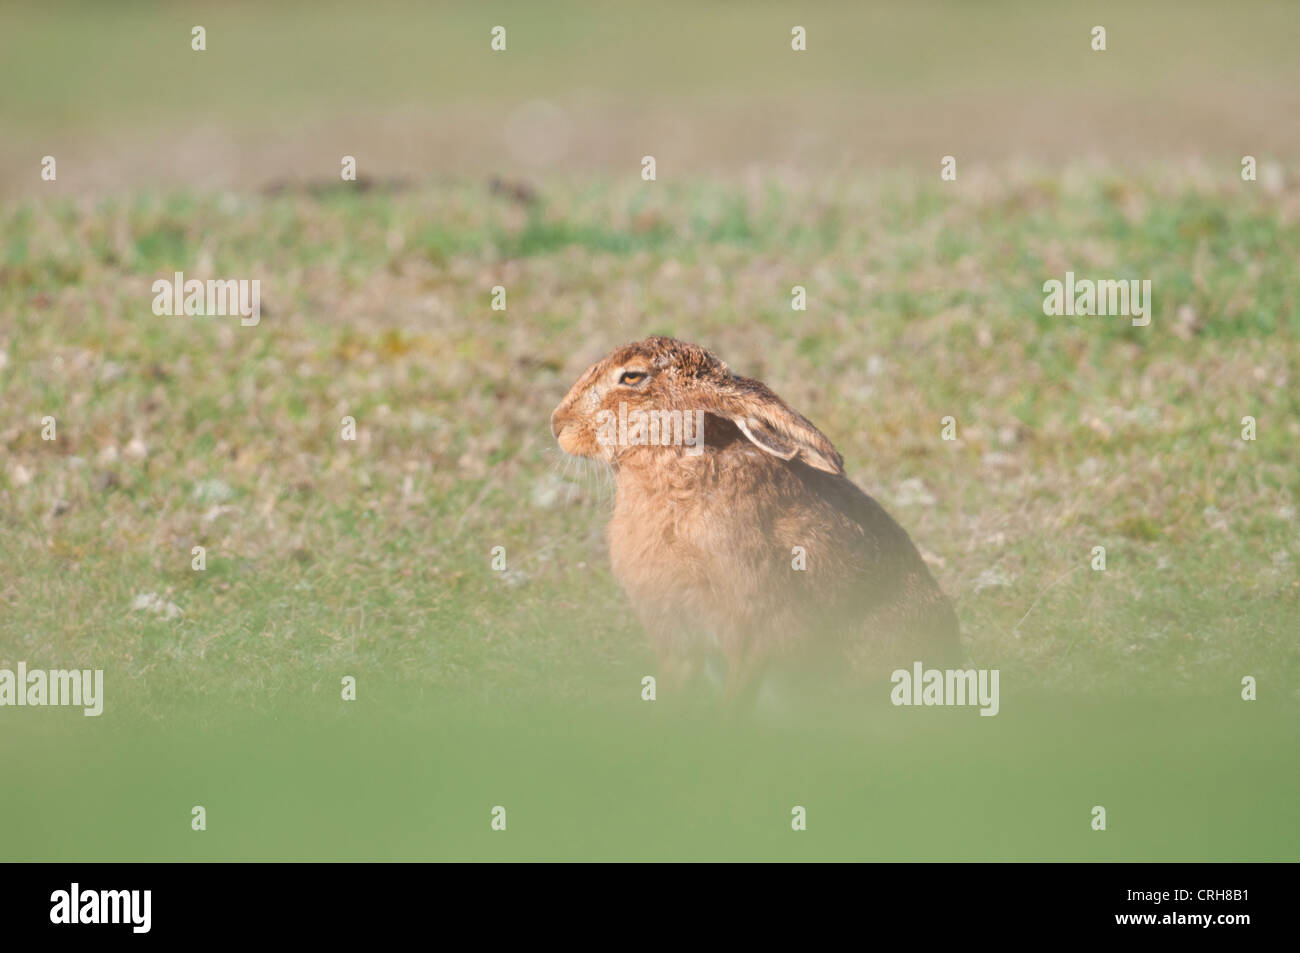 European brown hare with ears down sitting in grassy field with amusing look on face Stock Photo